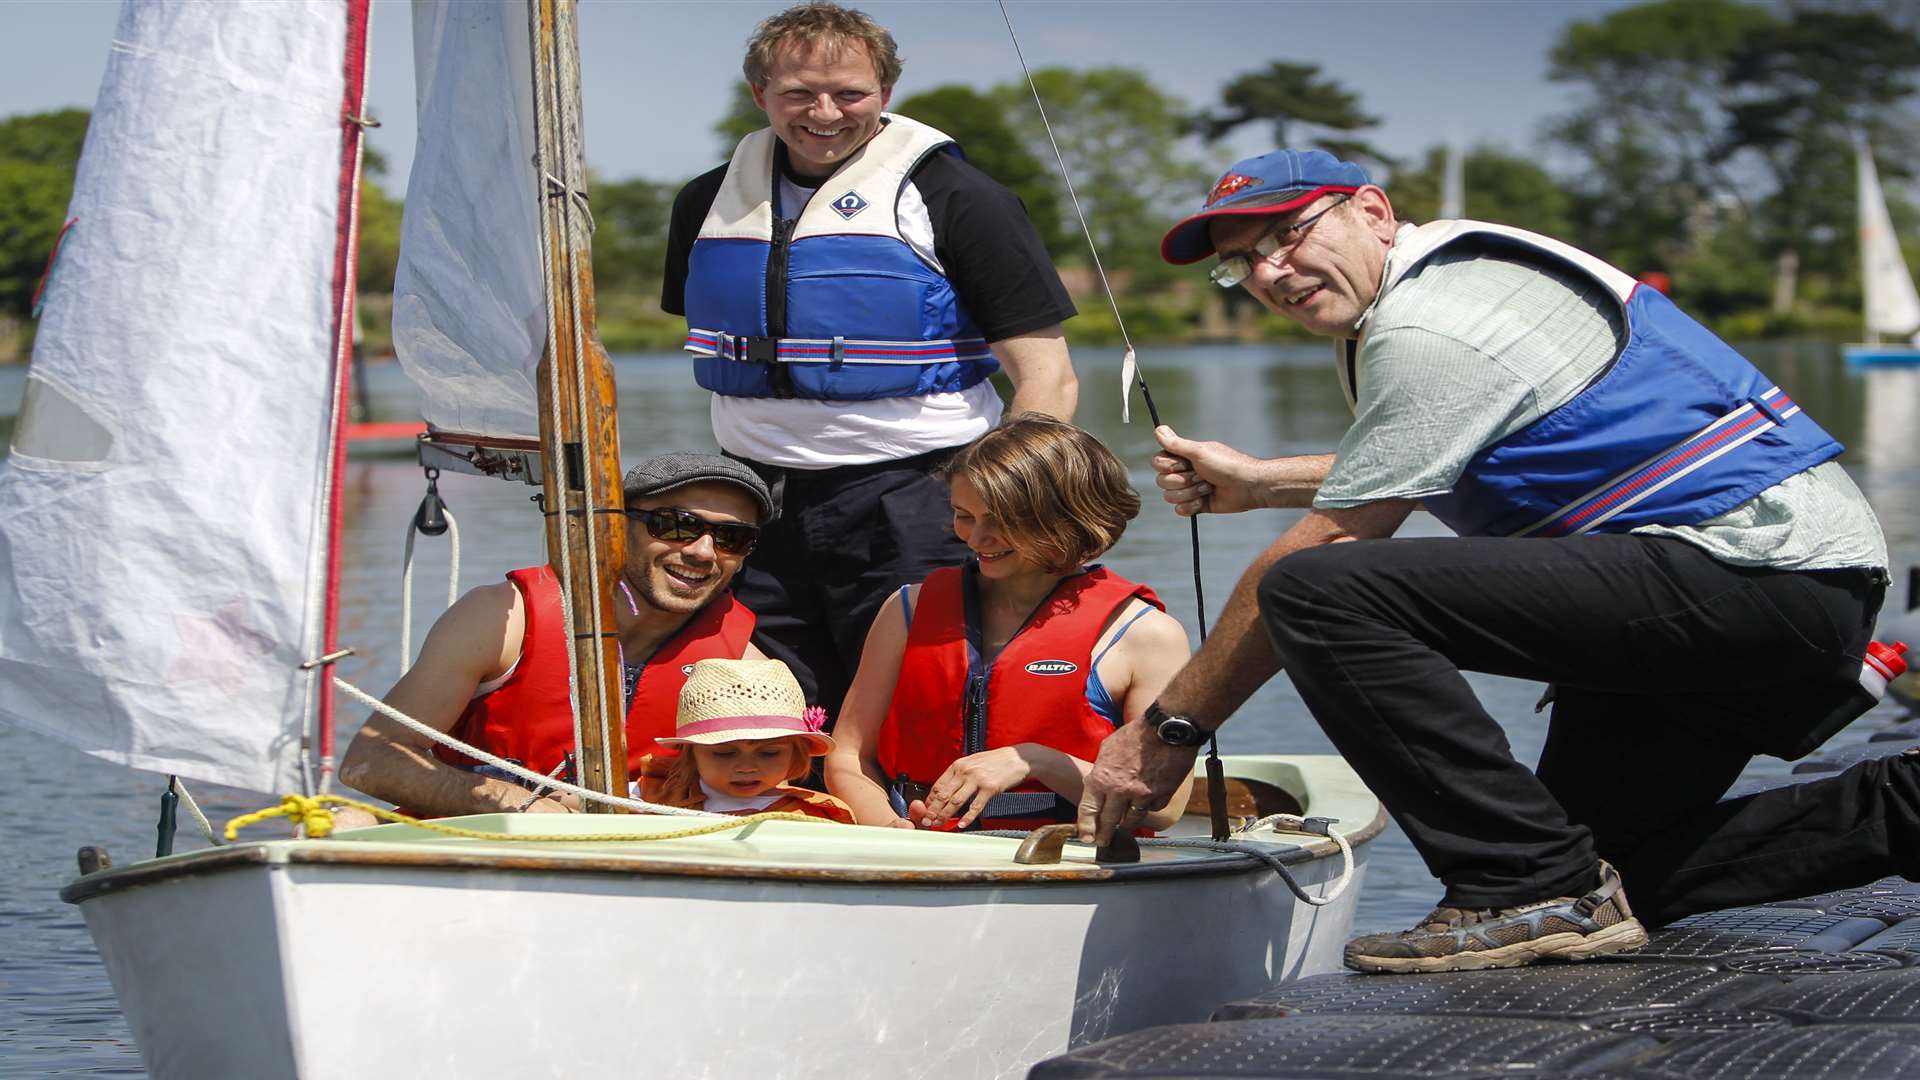 Push the Boat Out is about getting people out on the water and giving them the chance to find out how easy it is to get involved in sailing